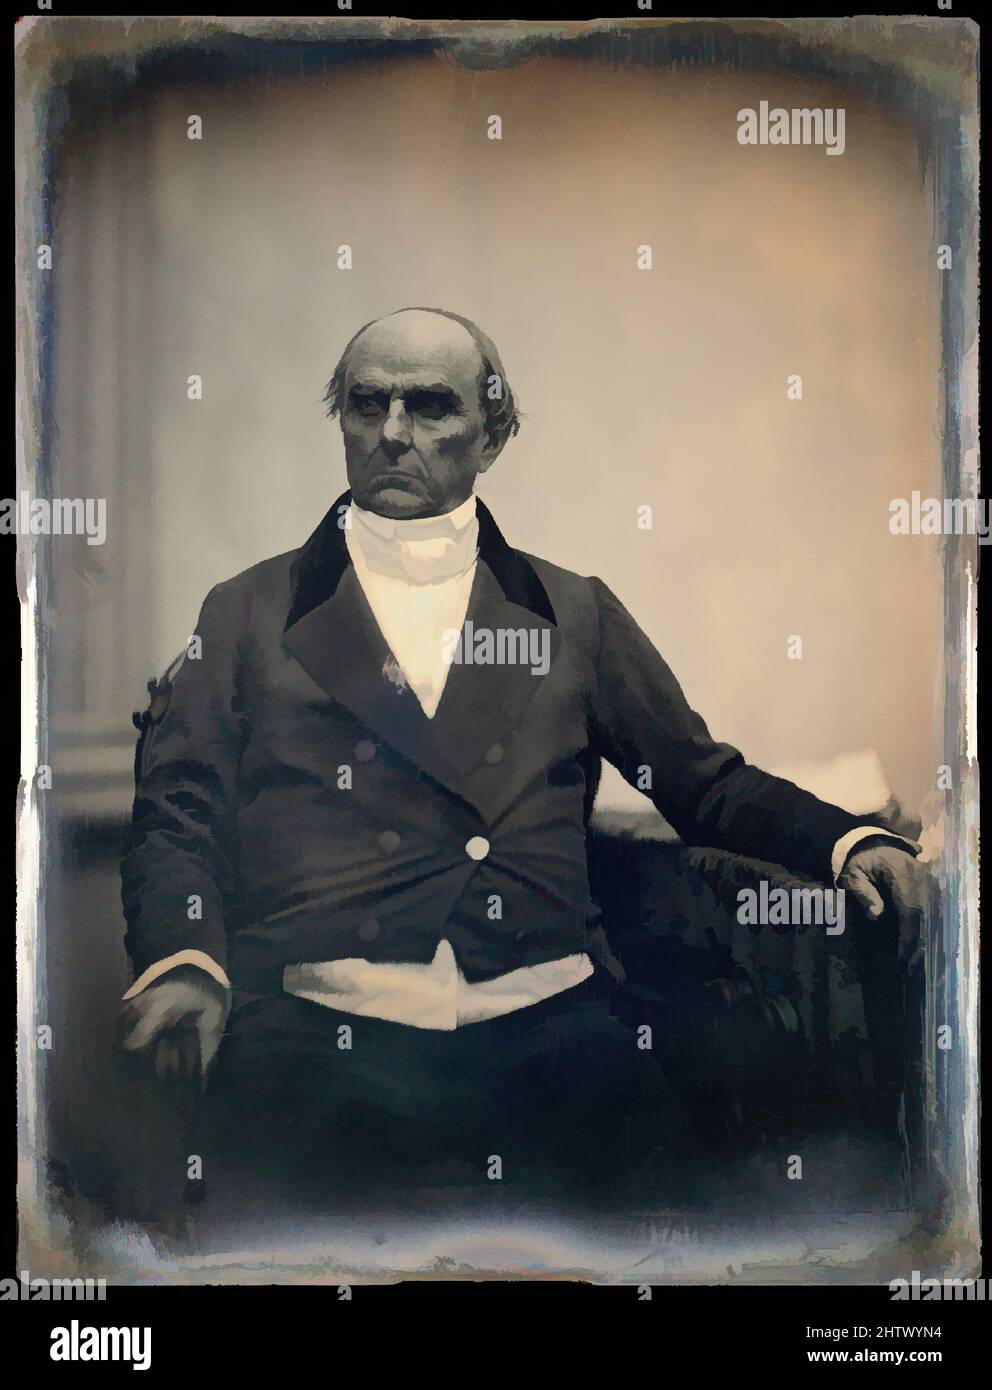 Art inspired by Daniel Webster, ca. 1850, Daguerreotype, 21.5 x 16.6 cm (8 7/16 x 6 9/16 in.), Photographs, Albert Sands Southworth (American, West Fairlee, Vermont 1811–1894 Charlestown, Massachusetts), Josiah Johnson Hawes (American, Wayland, Massachusetts 1808–1901 Crawford Notch, Classic works modernized by Artotop with a splash of modernity. Shapes, color and value, eye-catching visual impact on art. Emotions through freedom of artworks in a contemporary way. A timeless message pursuing a wildly creative new direction. Artists turning to the digital medium and creating the Artotop NFT Stock Photo